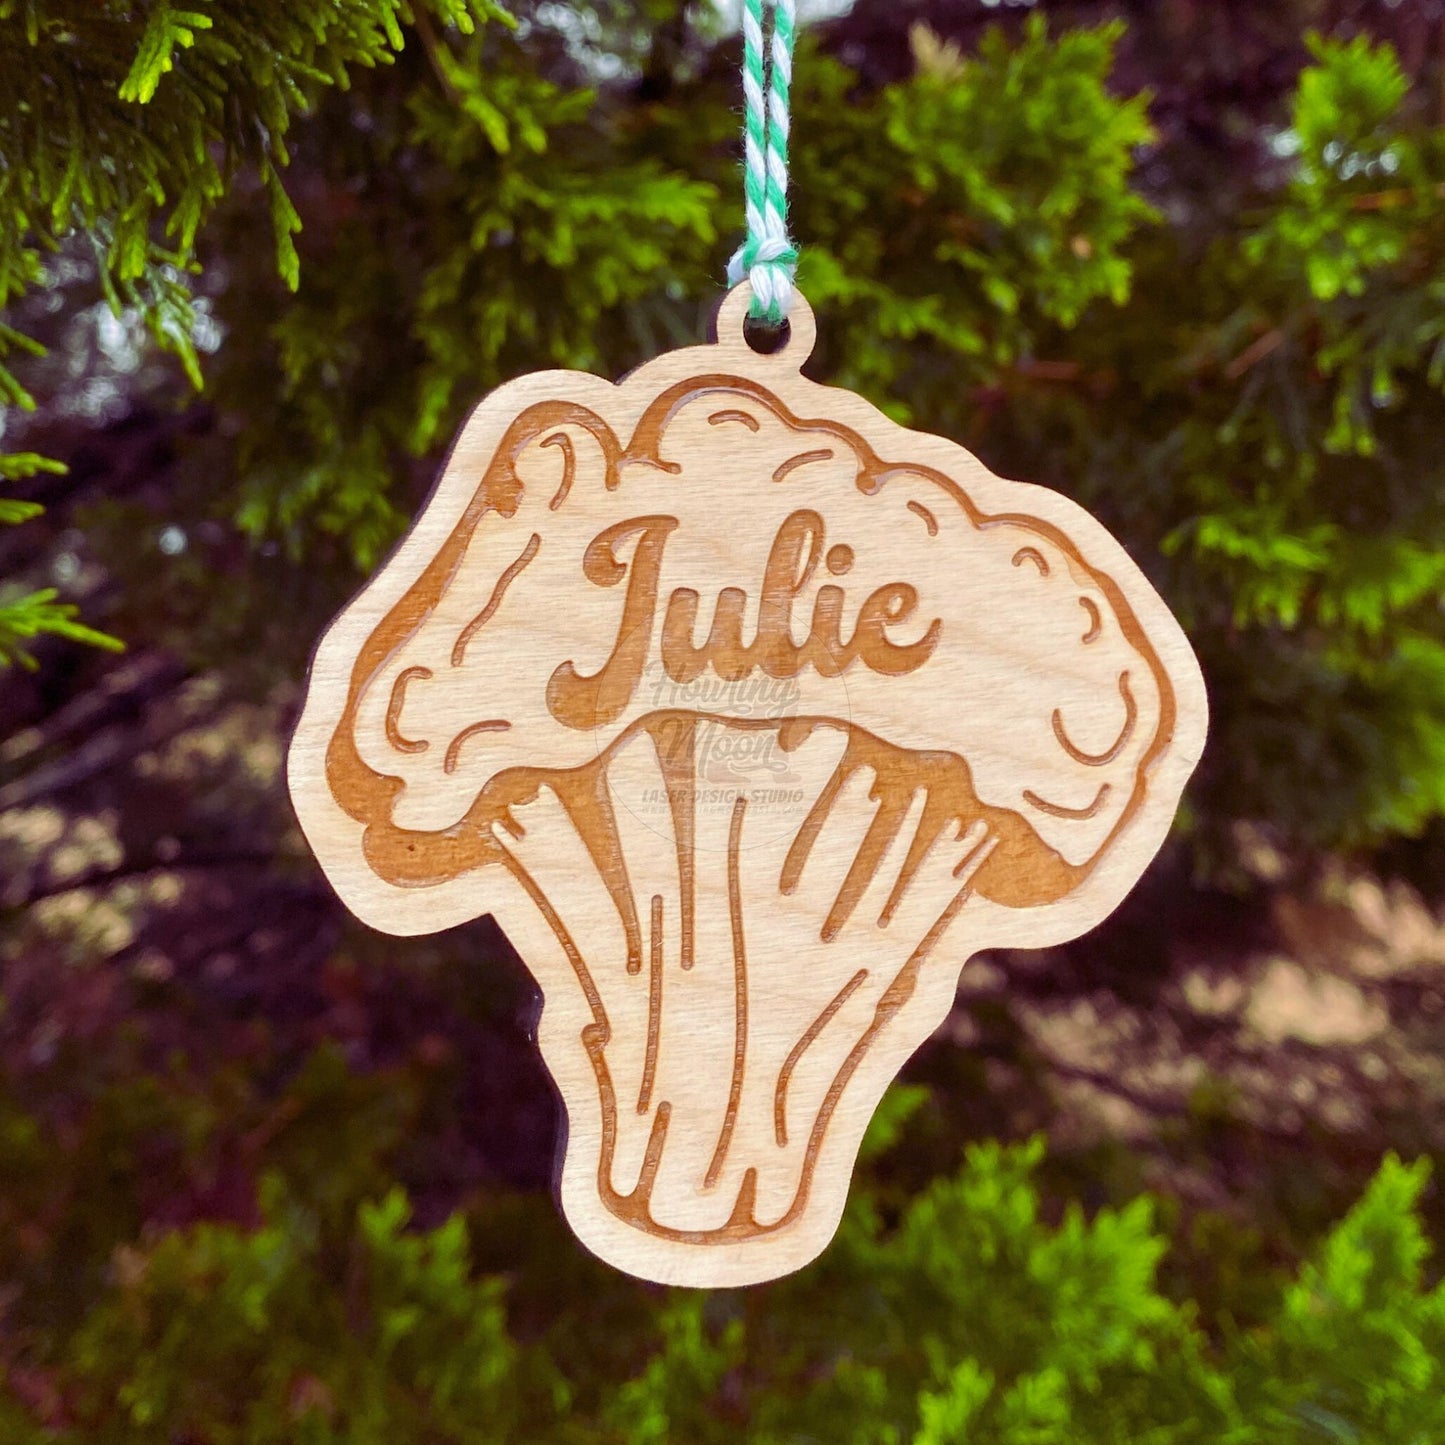 Personalized broccoli ornament made of natural wood hanging from a tree - made by Howling Moon Laser Design Studio in Virginia, USA